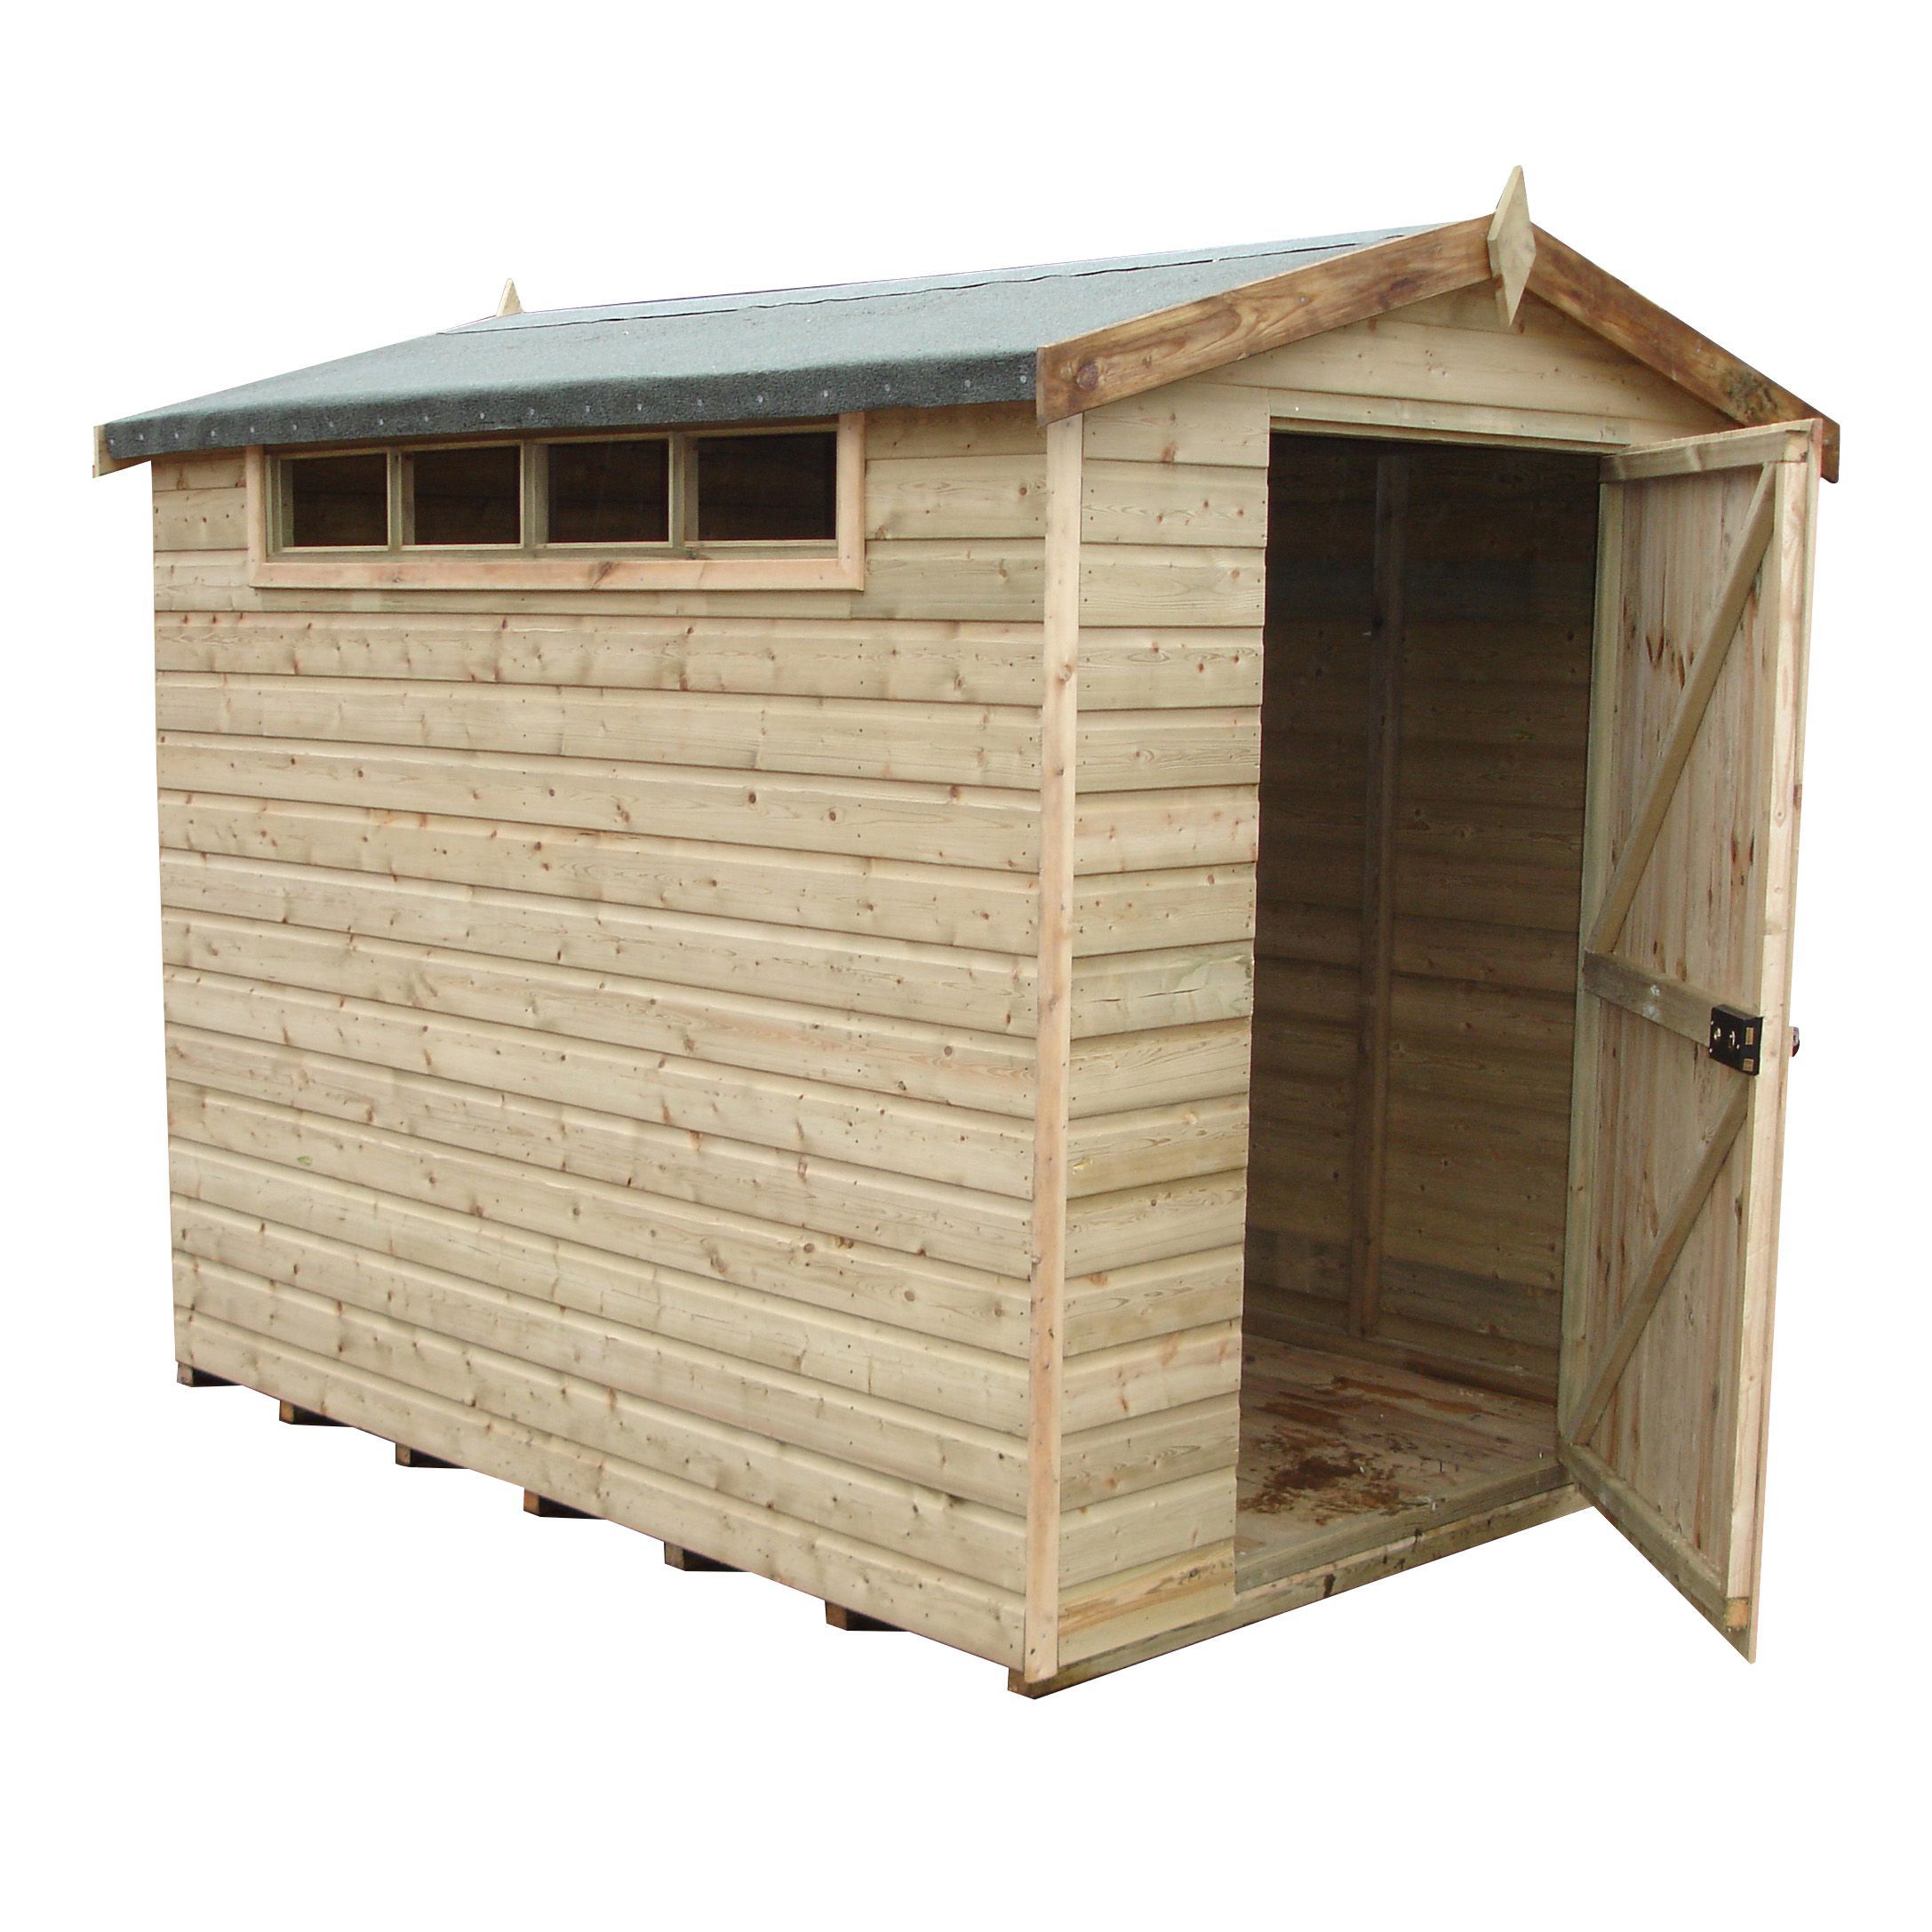 Shire 10x8 Apex Shed - Base not includedAssembly service included